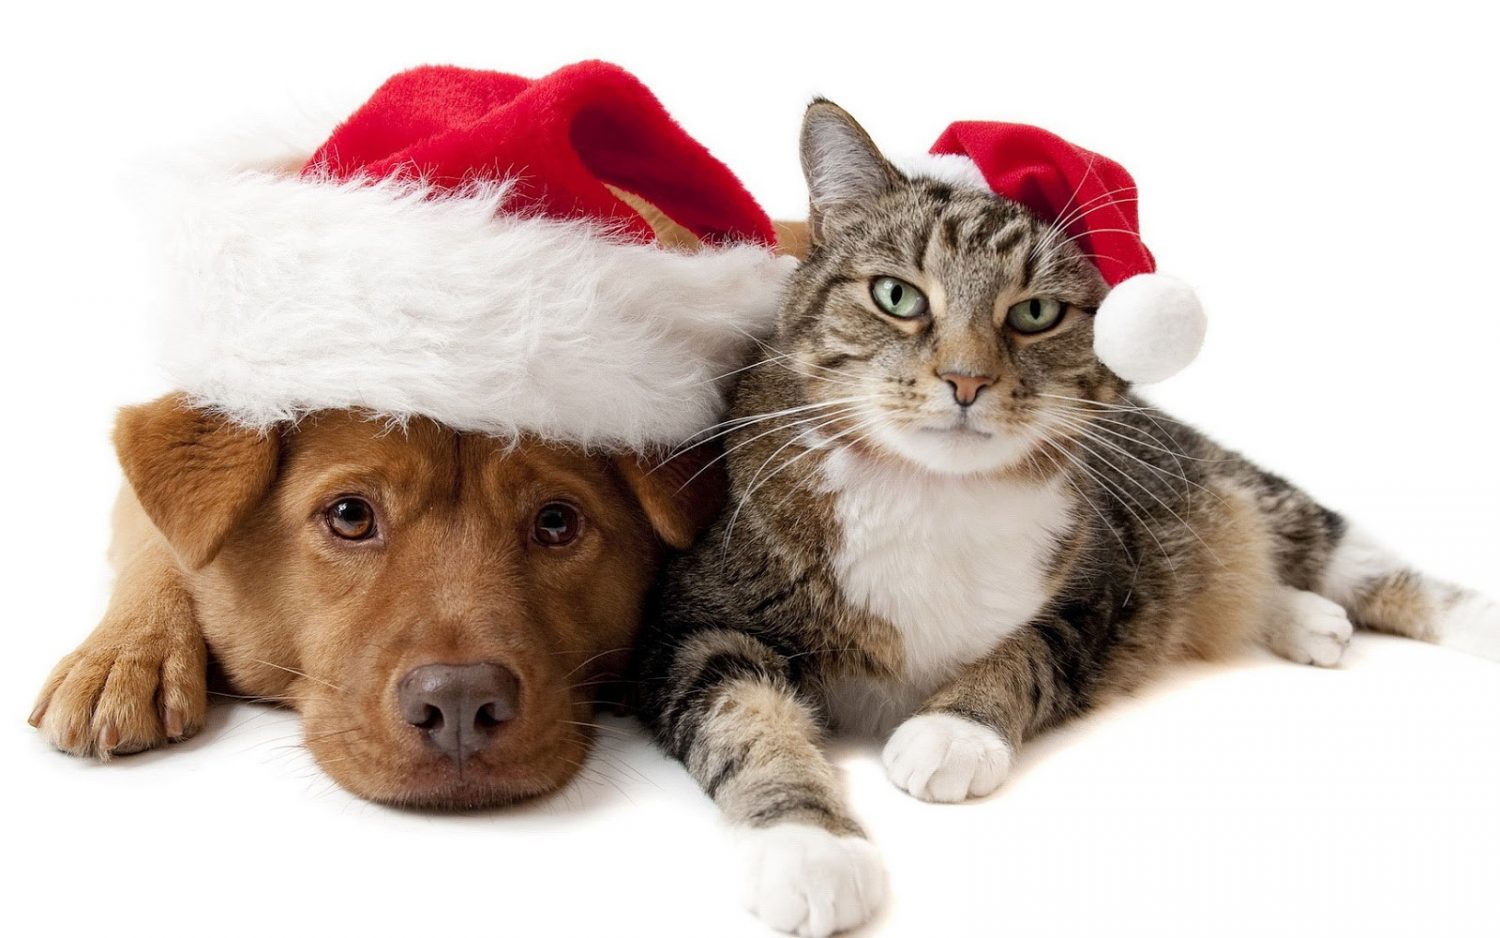 Dog & Cat with Christmas Hats